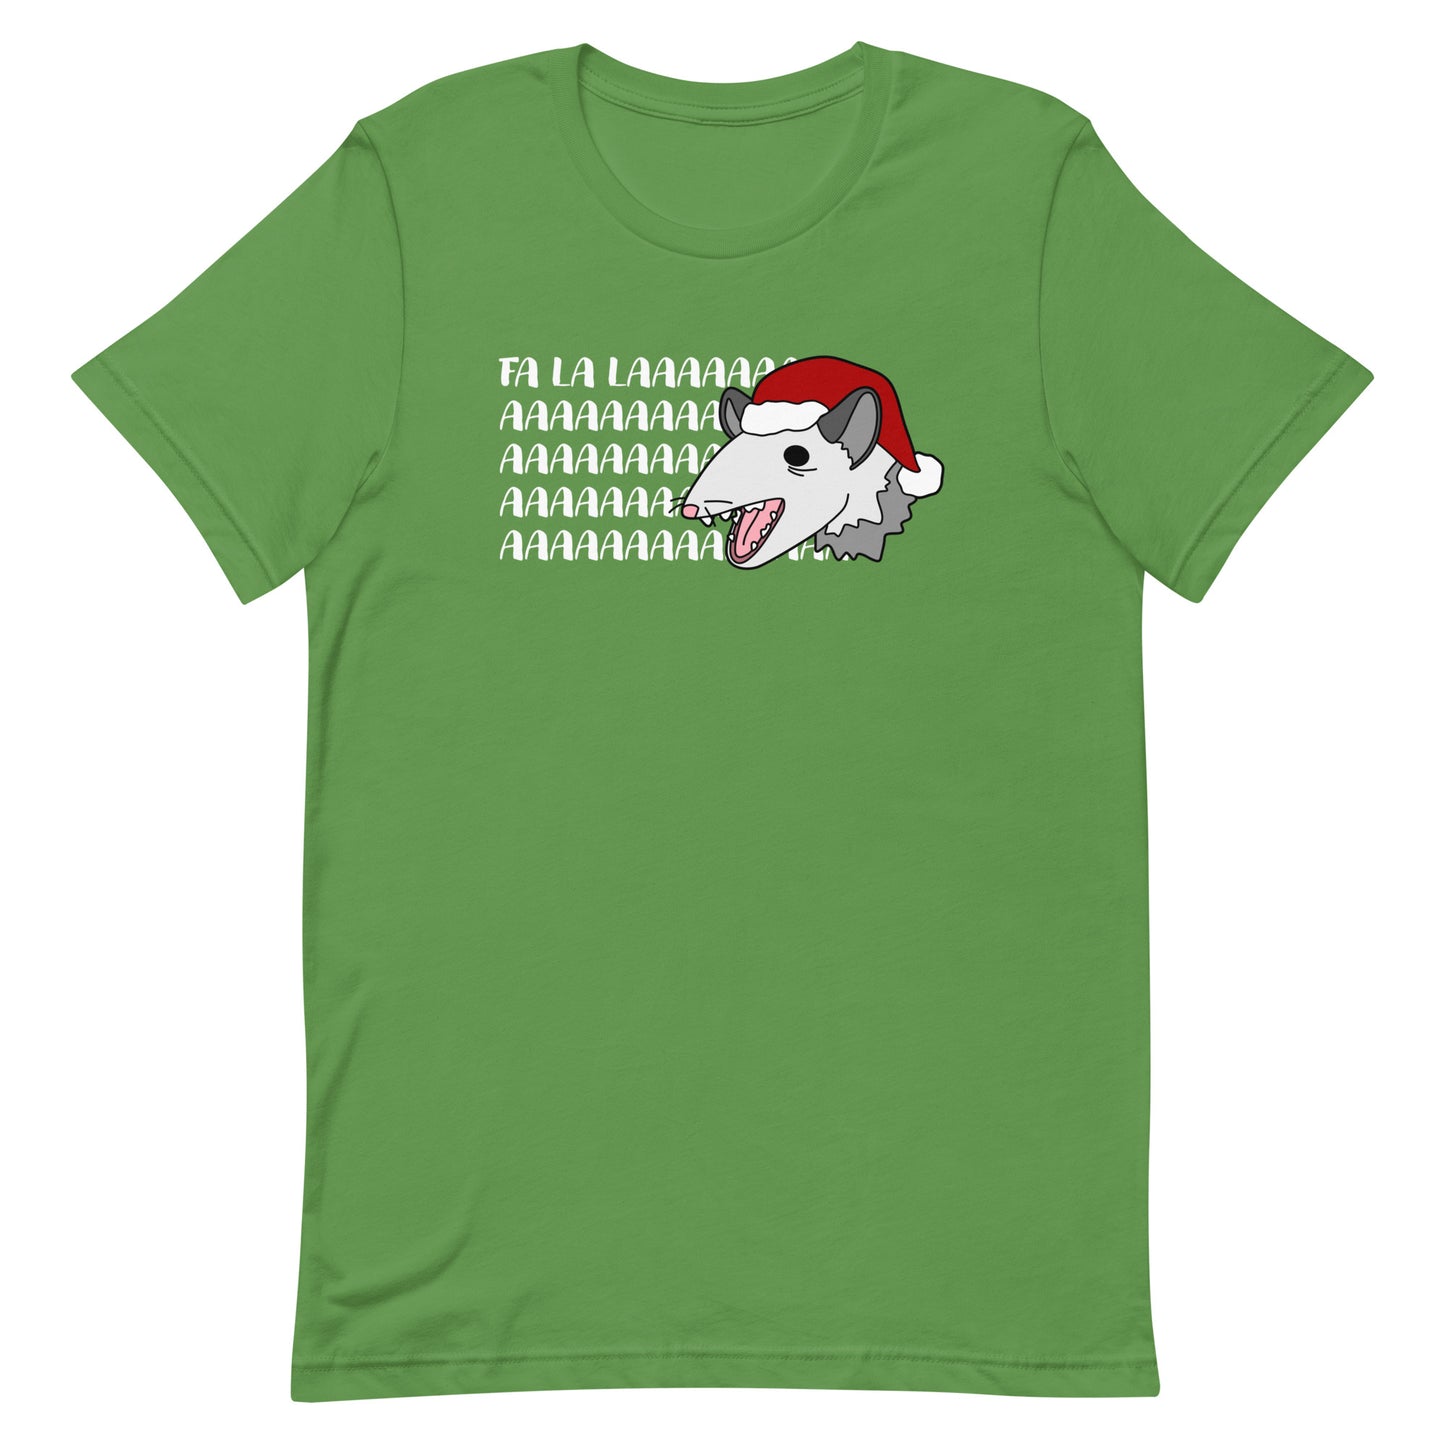 A green crewneck t-shirt featuring an illustration of a possum wearing a Santa hat. The possum appears to be screaming, and text behind his head reads "FA LA LAAAAAA"